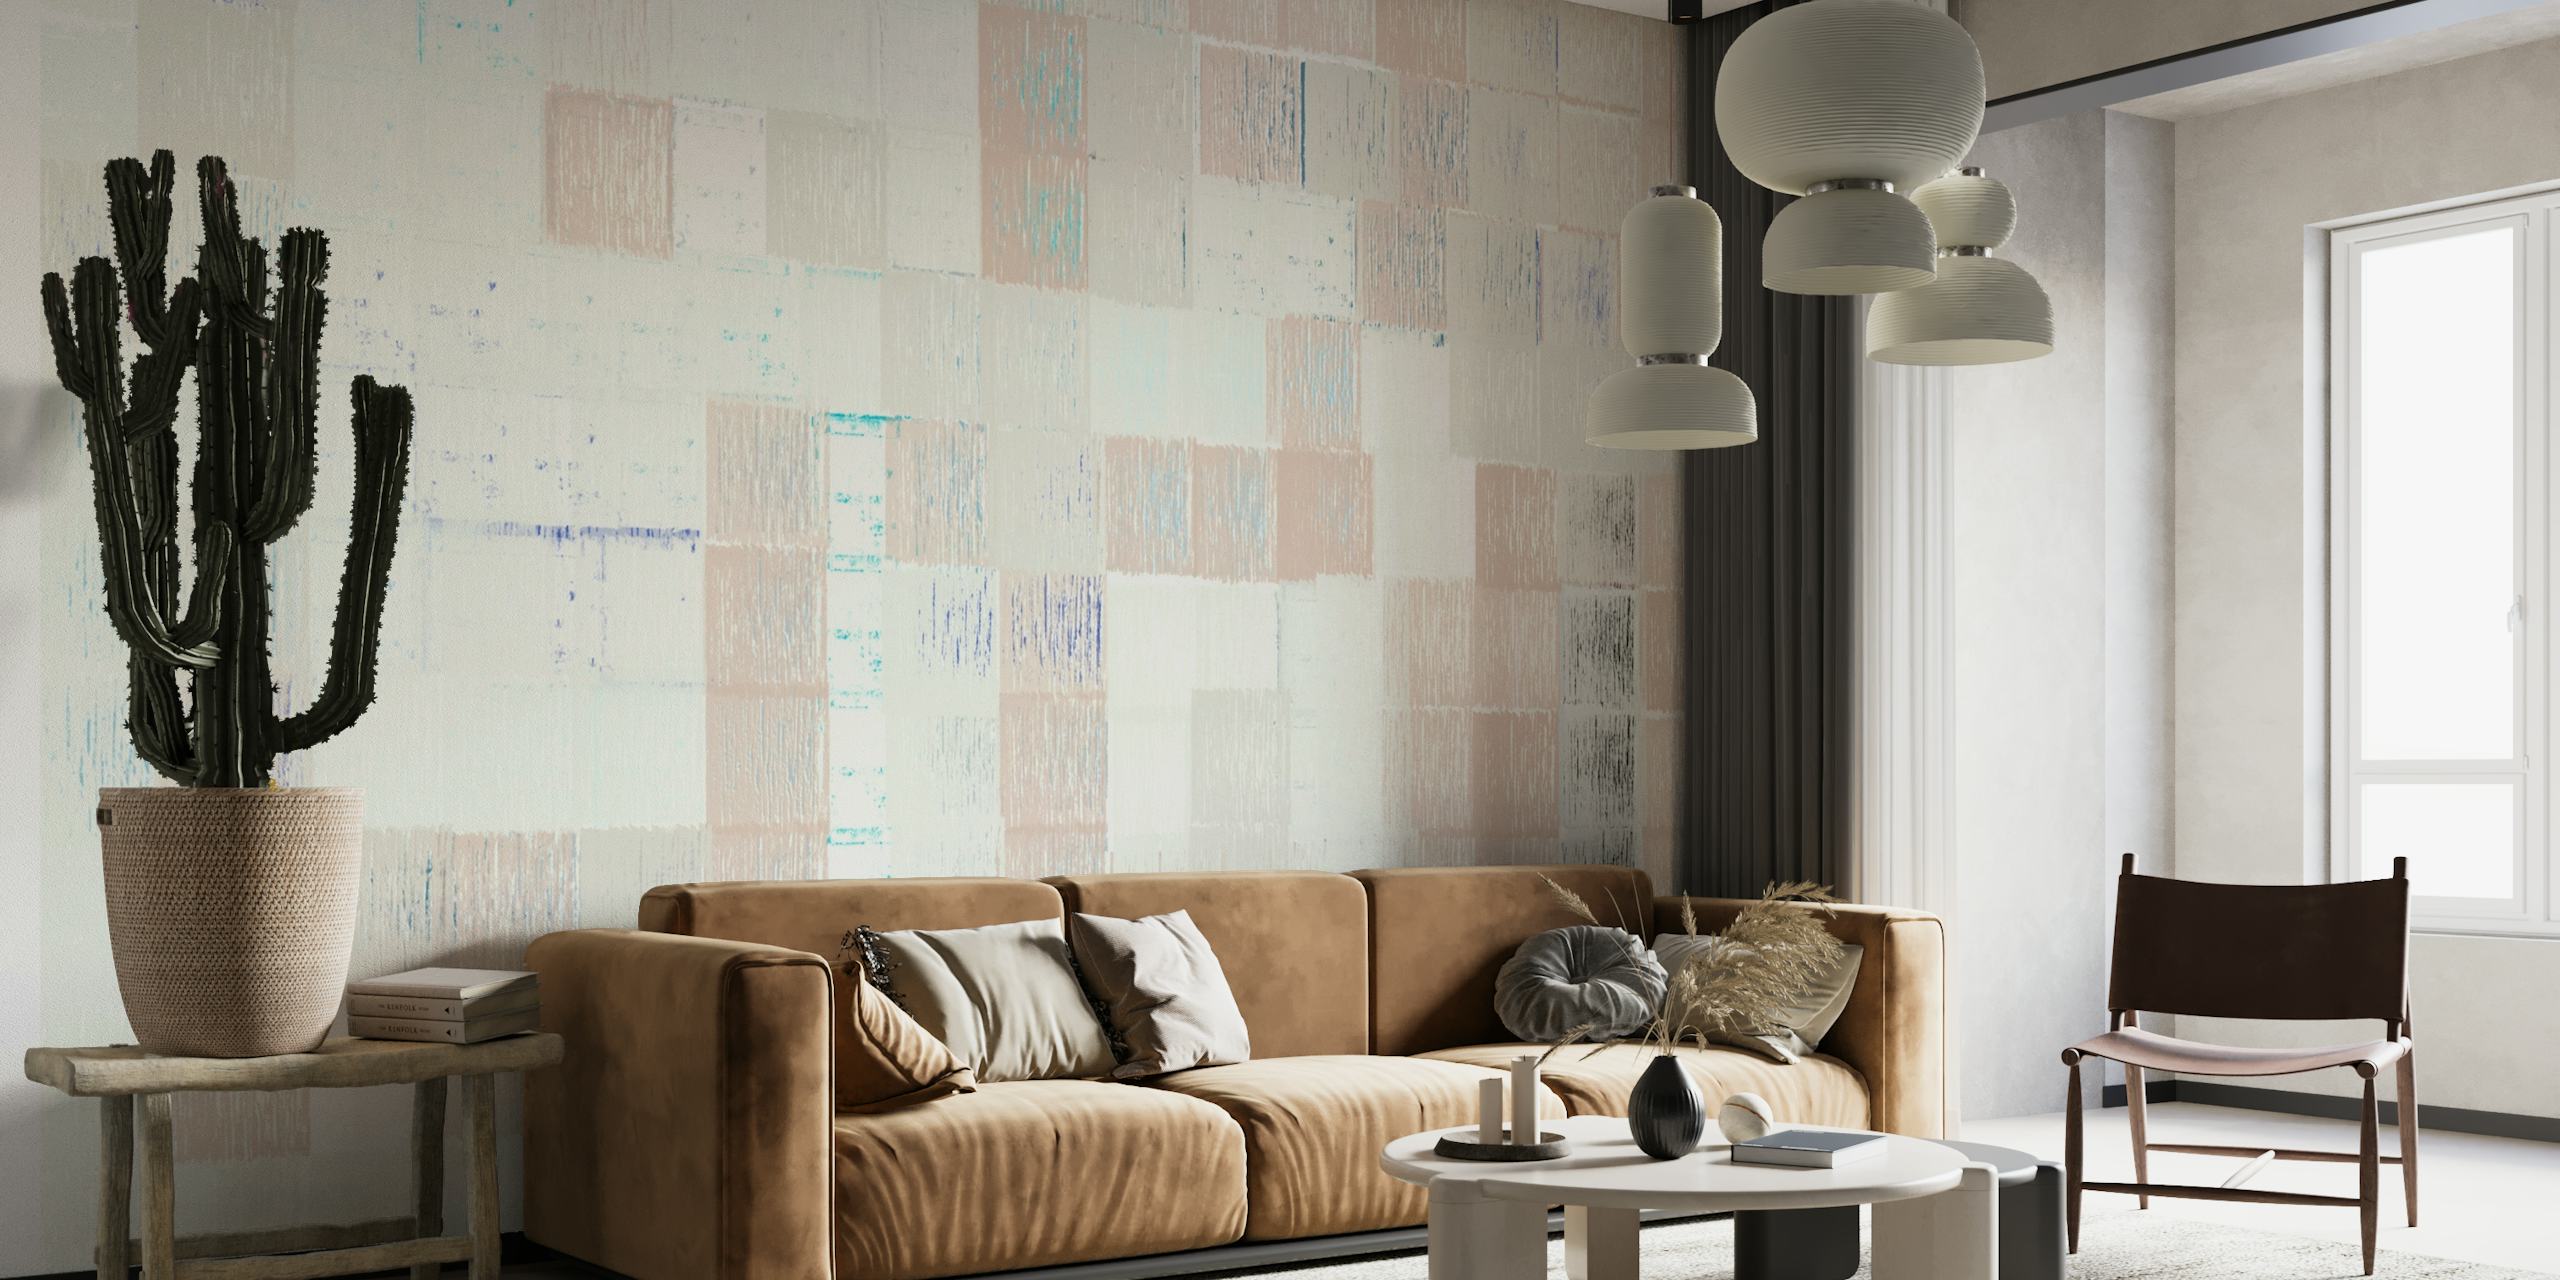 Abstract wall mural with geometric shapes and muted tones inspired by Tokyo's cityscape